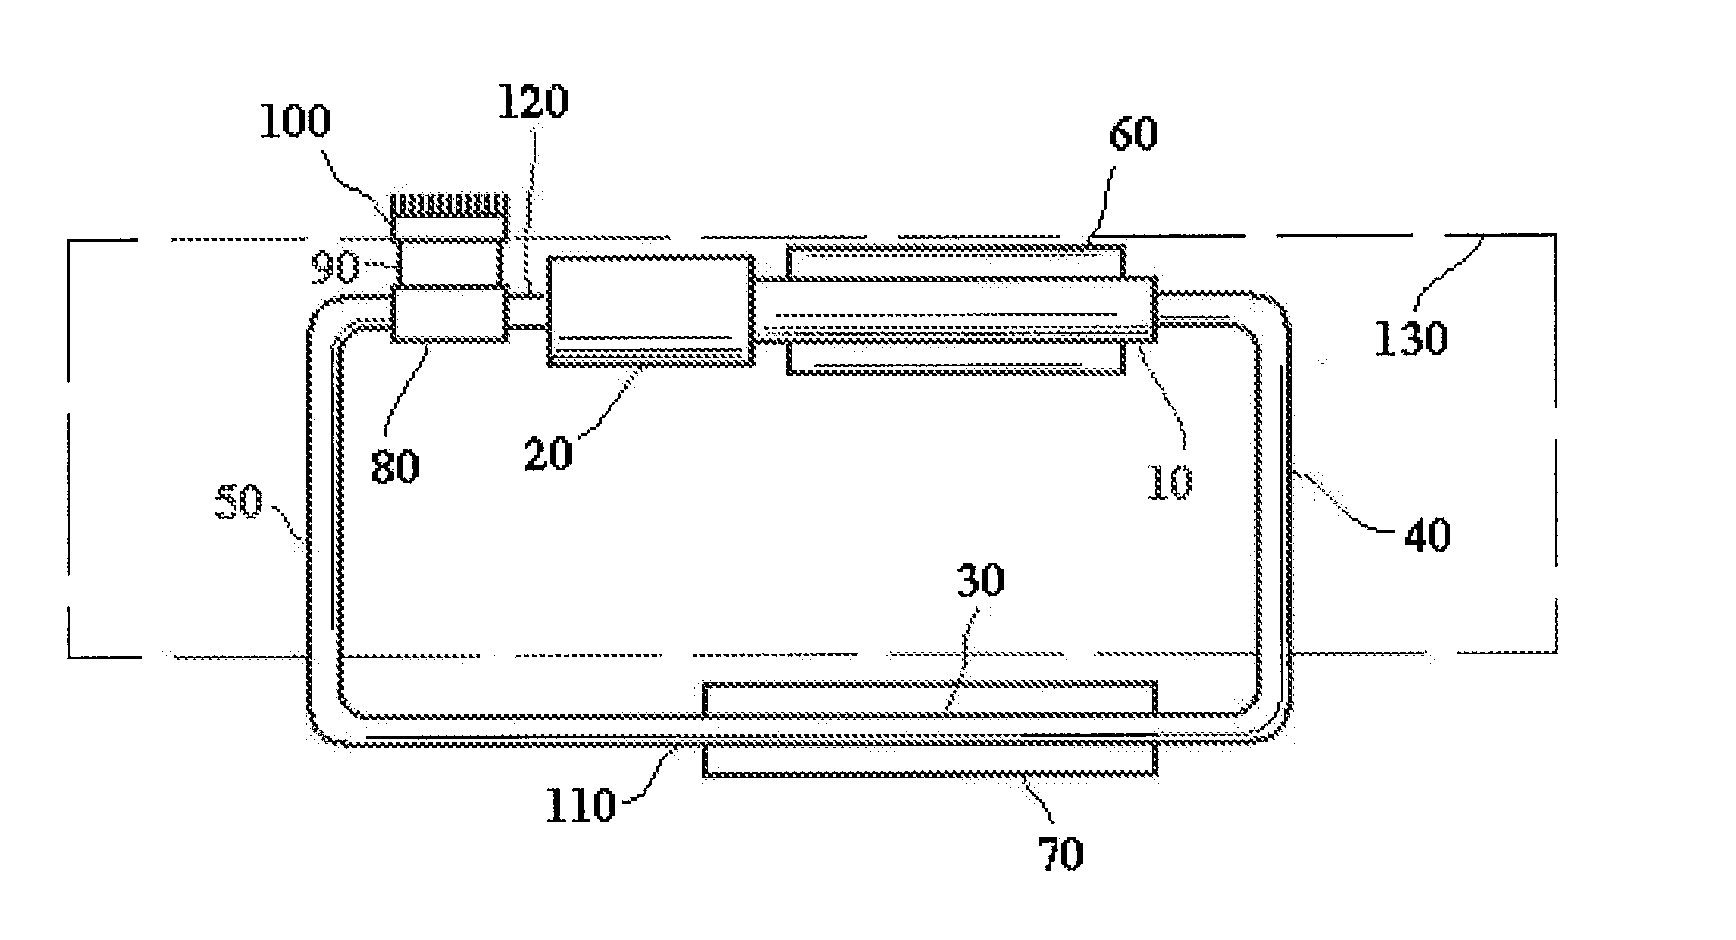 Thermal control device